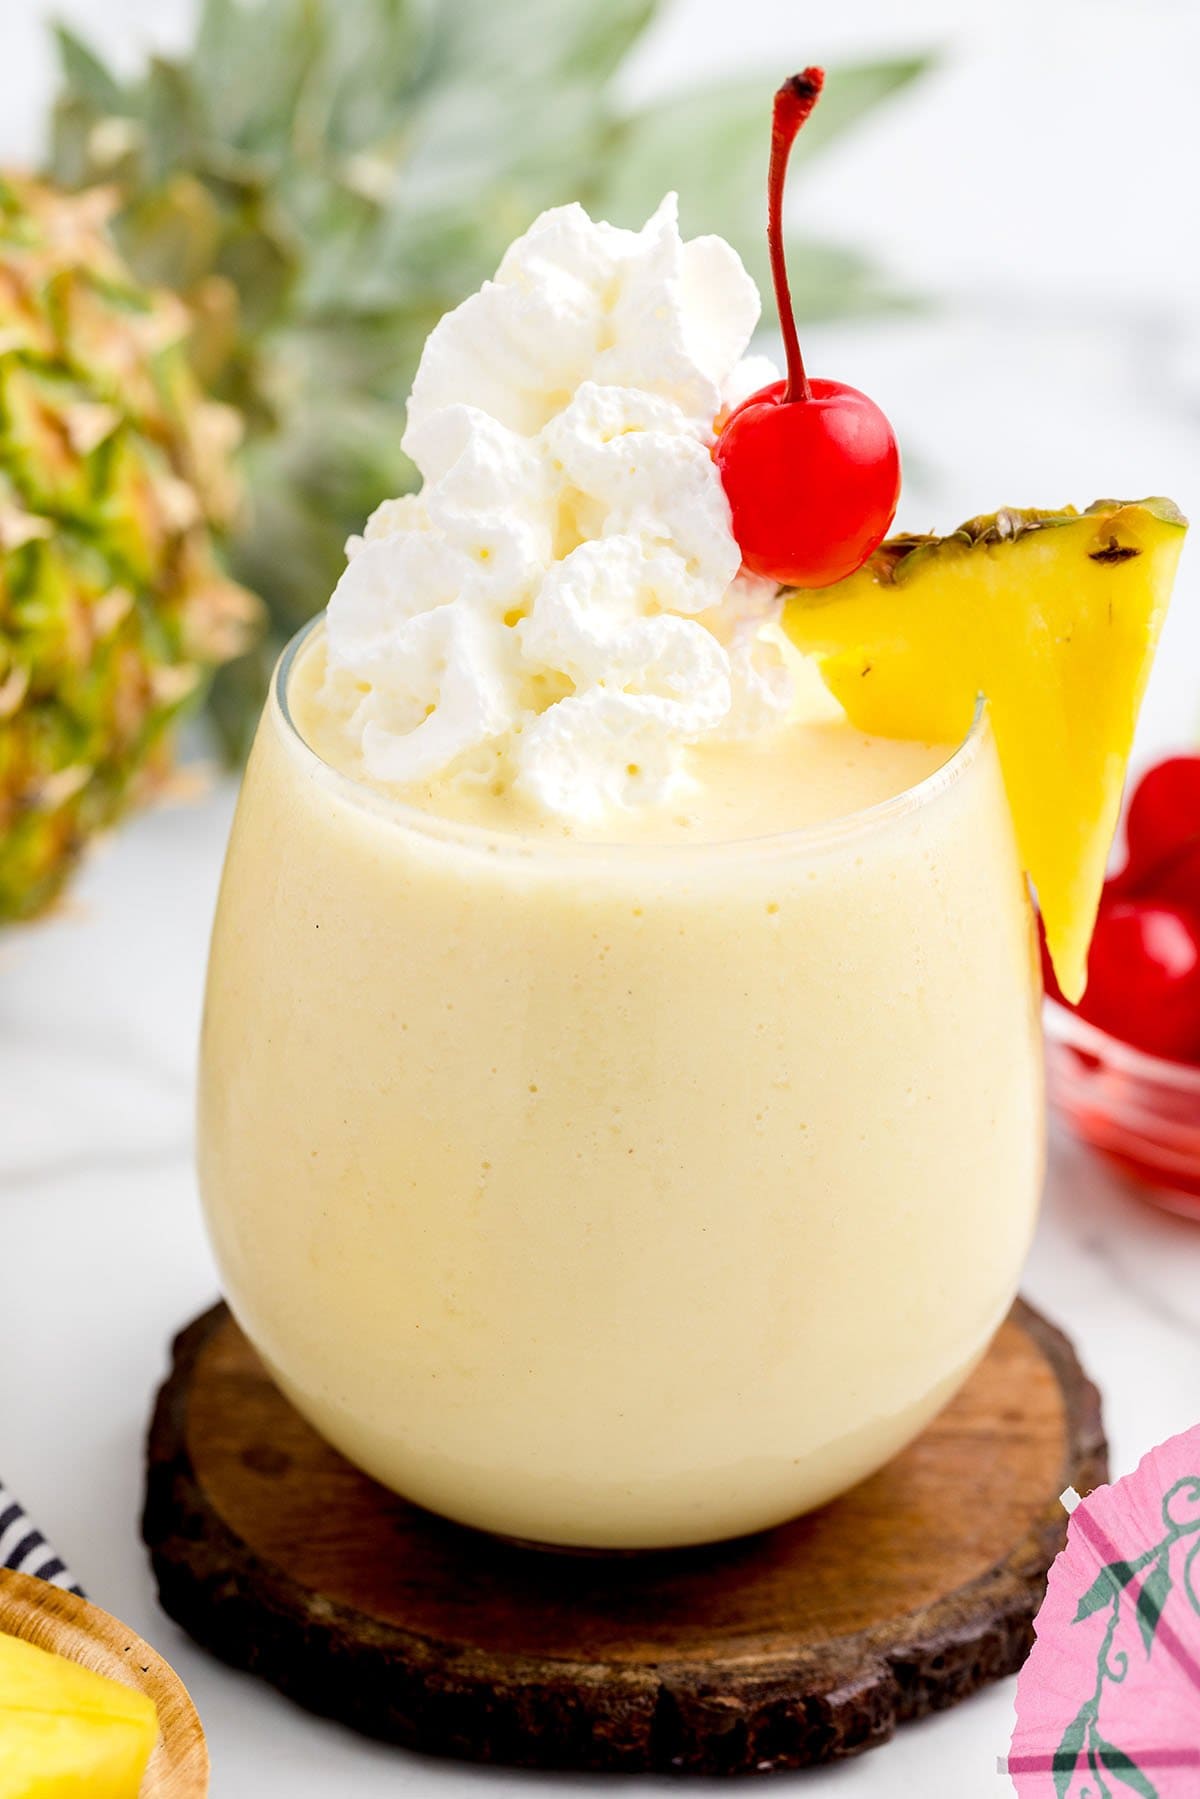 Boozy Dole Whip with whipped cream